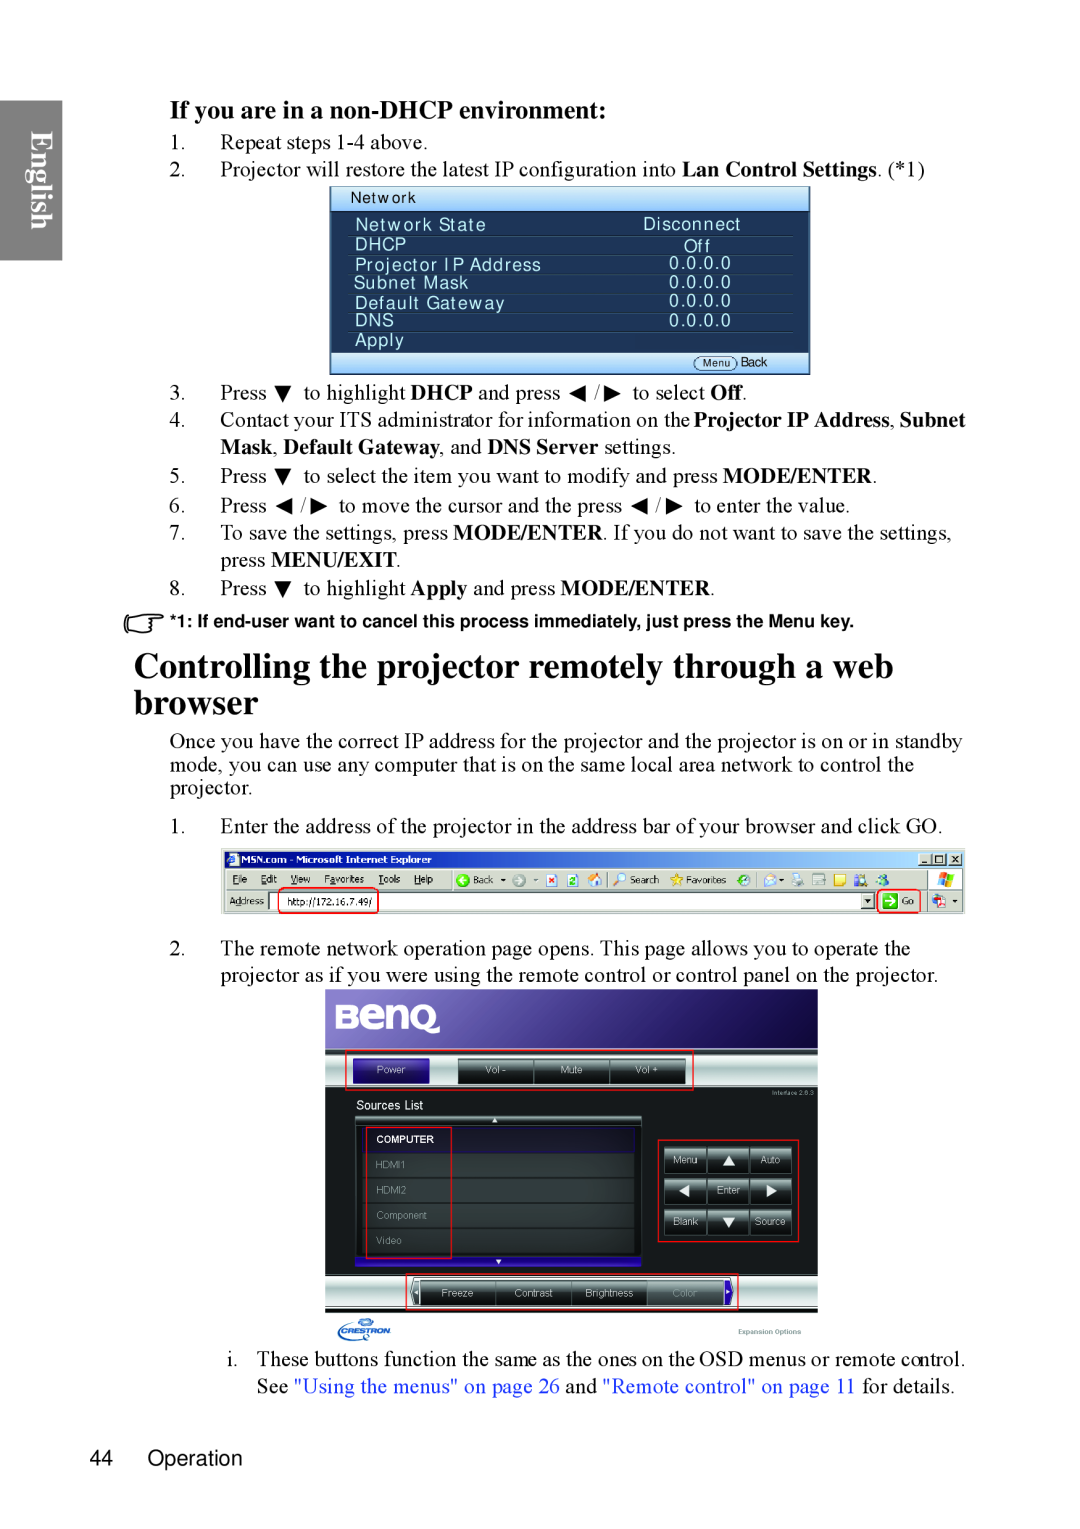 BenQ SP840 Controlling the projector remotely through a web browser, If you are in a non-DHCP environment, English 